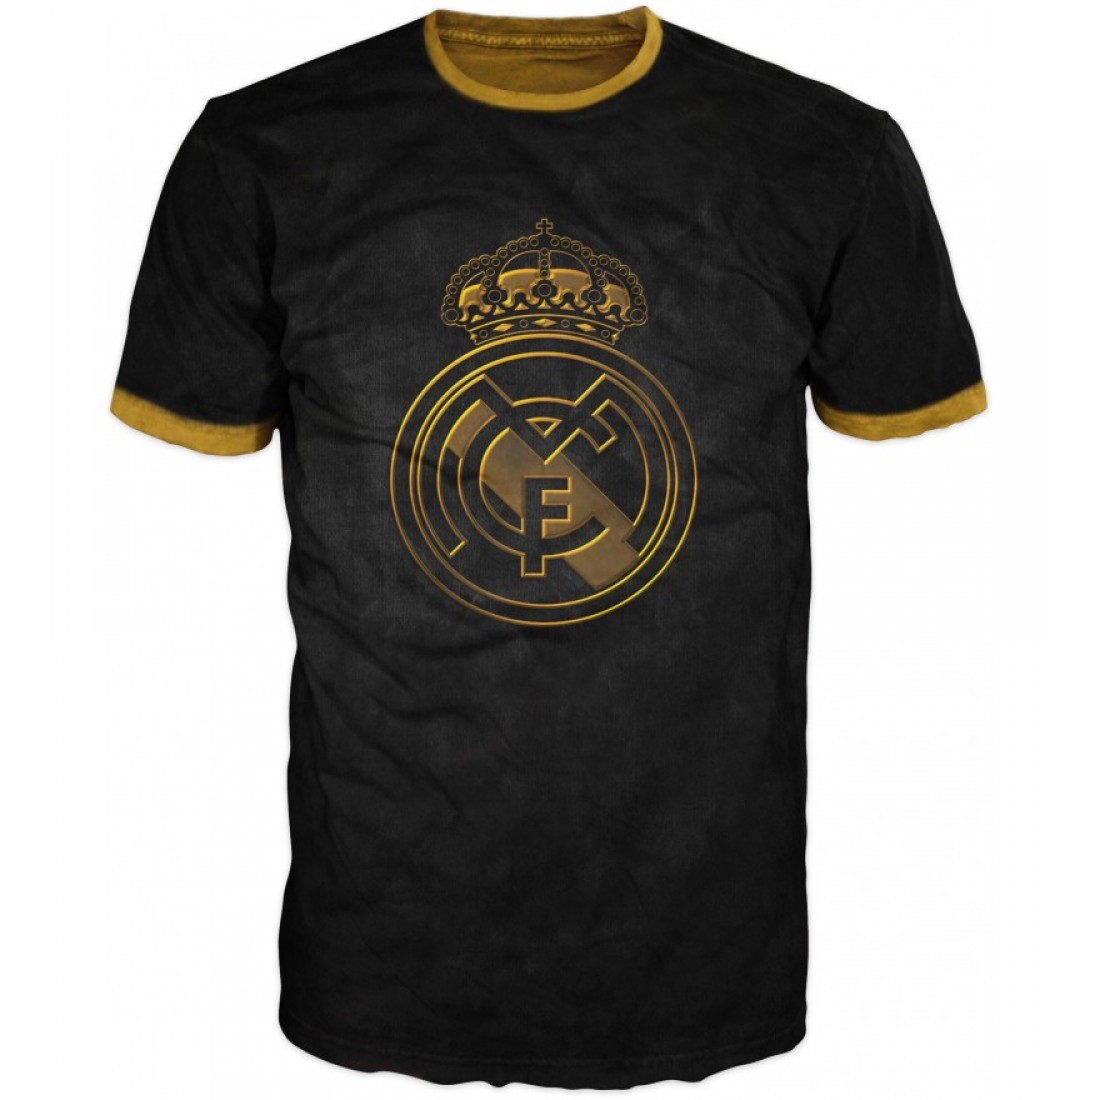 Real Madrid T-shirt for the fans of the football team